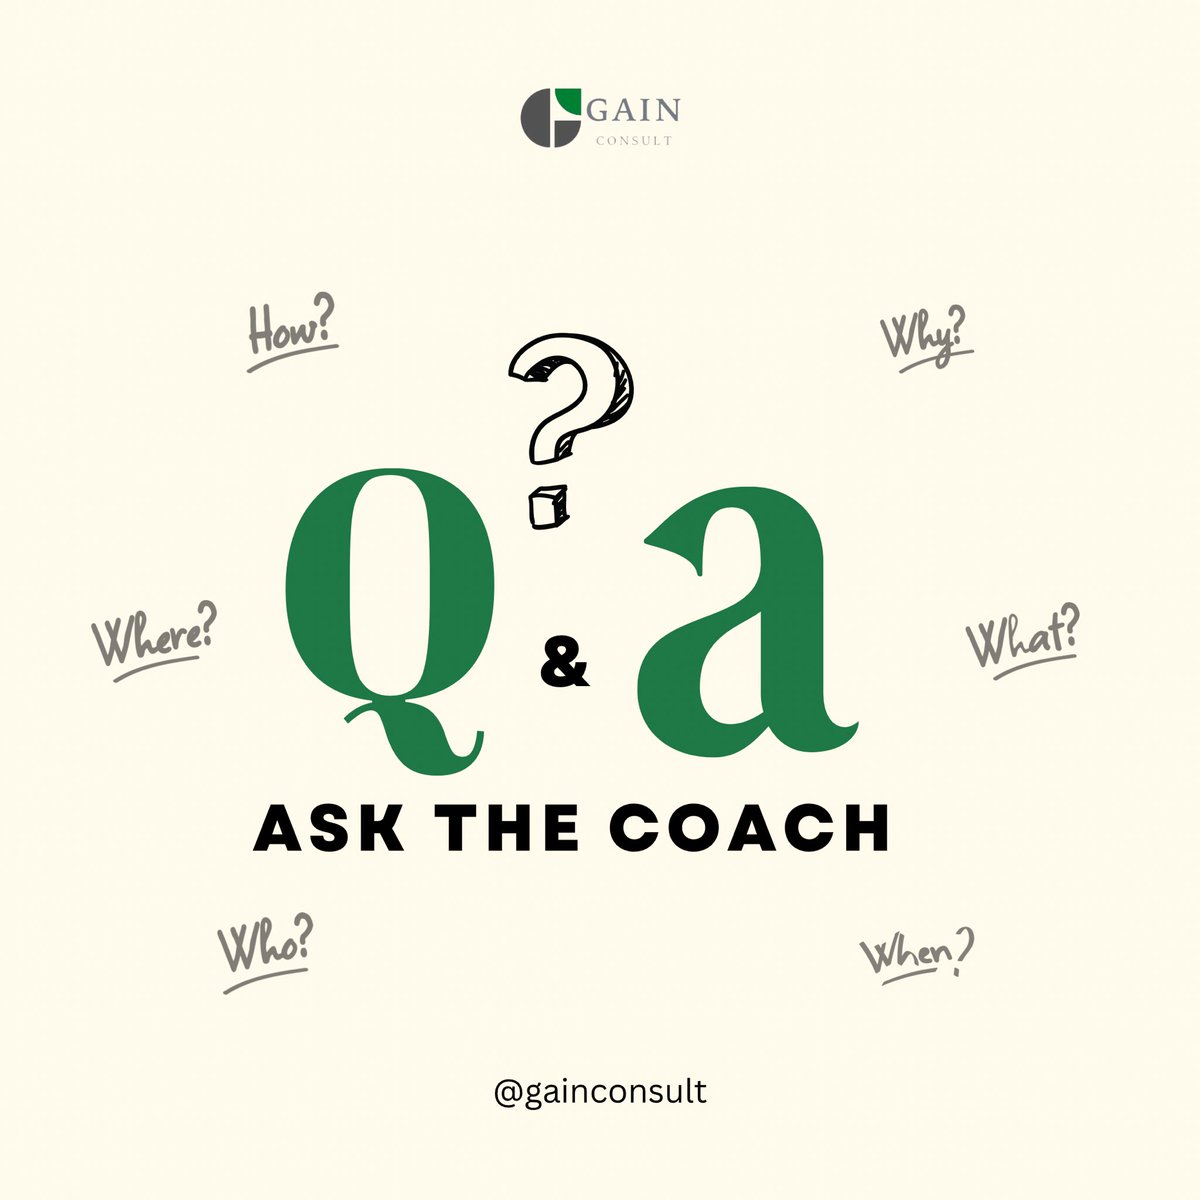 #FridaySpecial: #AskTheCoach 

📢  Do you have questions about your career, workplace, work-life balance, time management or professional growth? Use the hashtag #askacoach to send in your queries.

Send us a direct message!
Use the hashtag #askacoach

#FridaySpecial #tgif #QandA